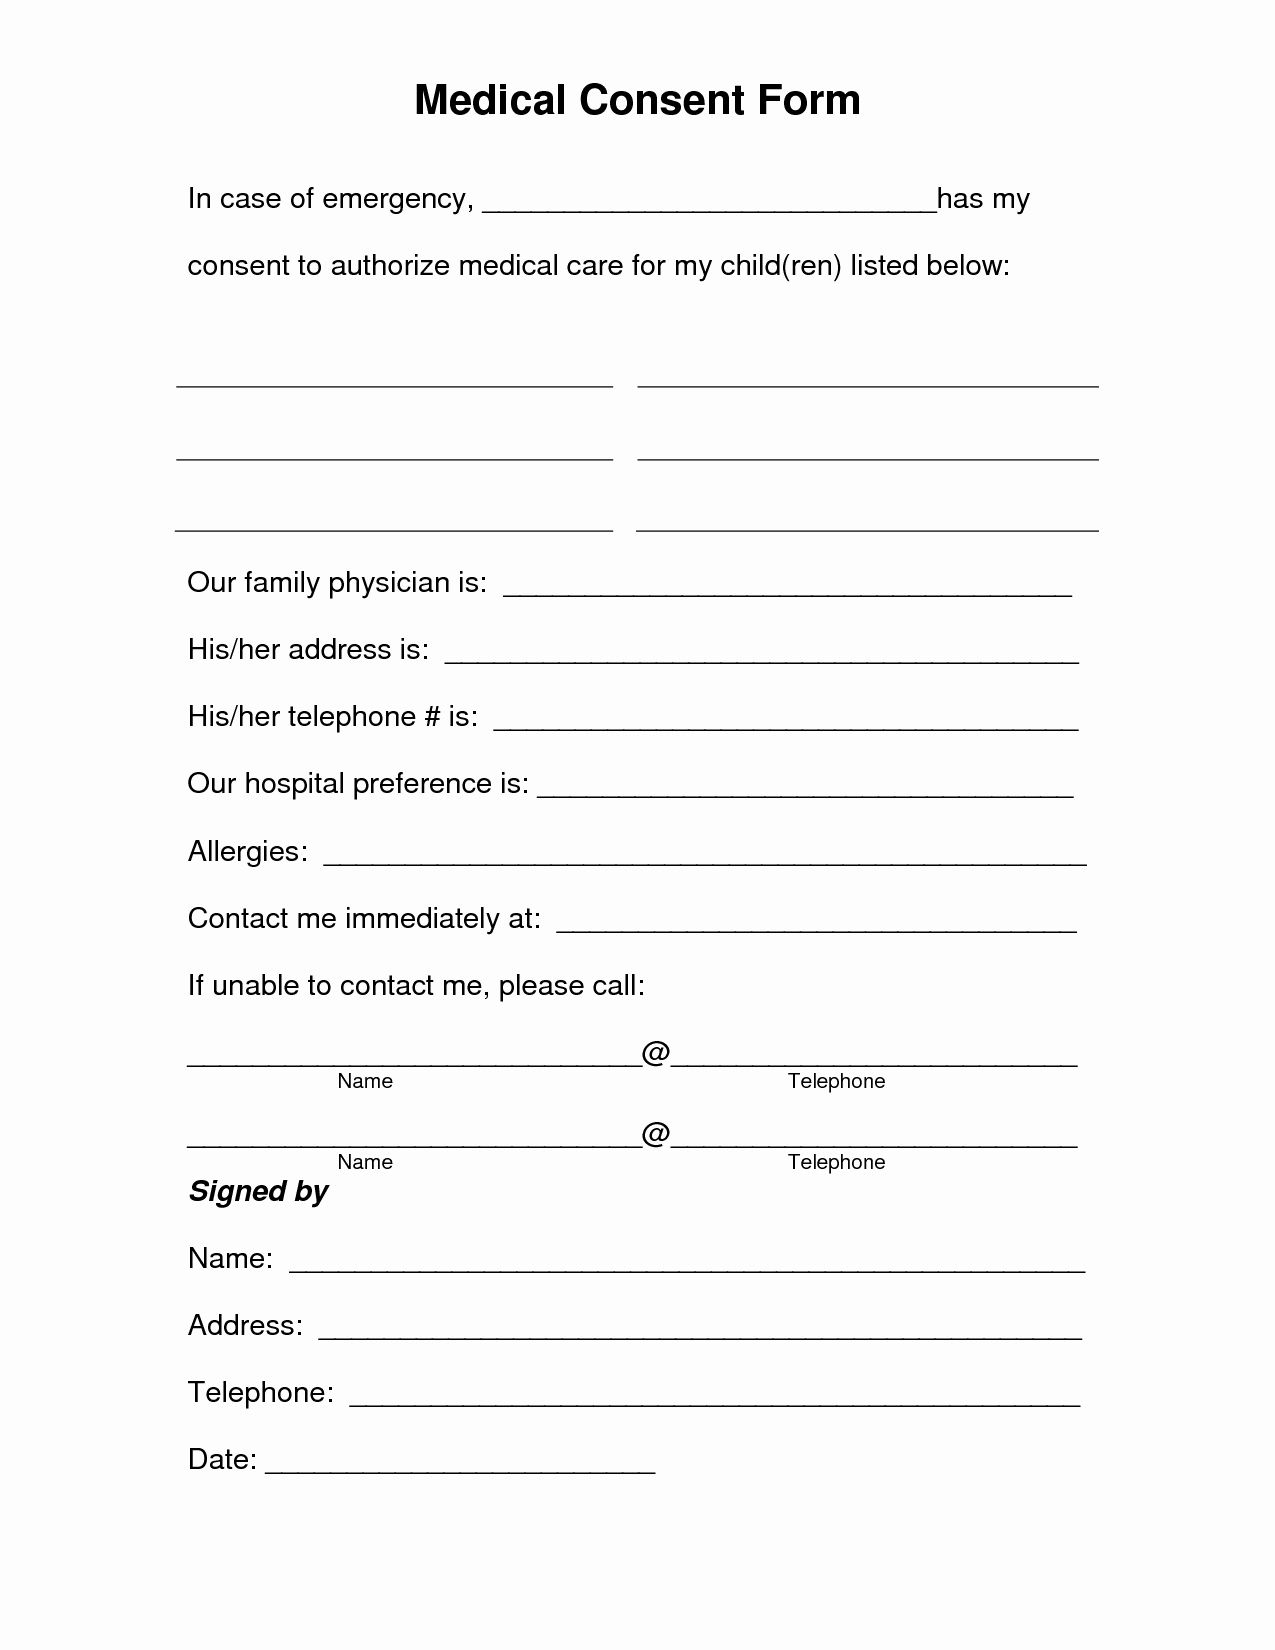 Medical Procedure Consent Form Template Best Of Free Printable Medical Consent Form Child Travel Consent Form Children s Medical Travel Consent Form - Free Printable Child Medical Consent Form